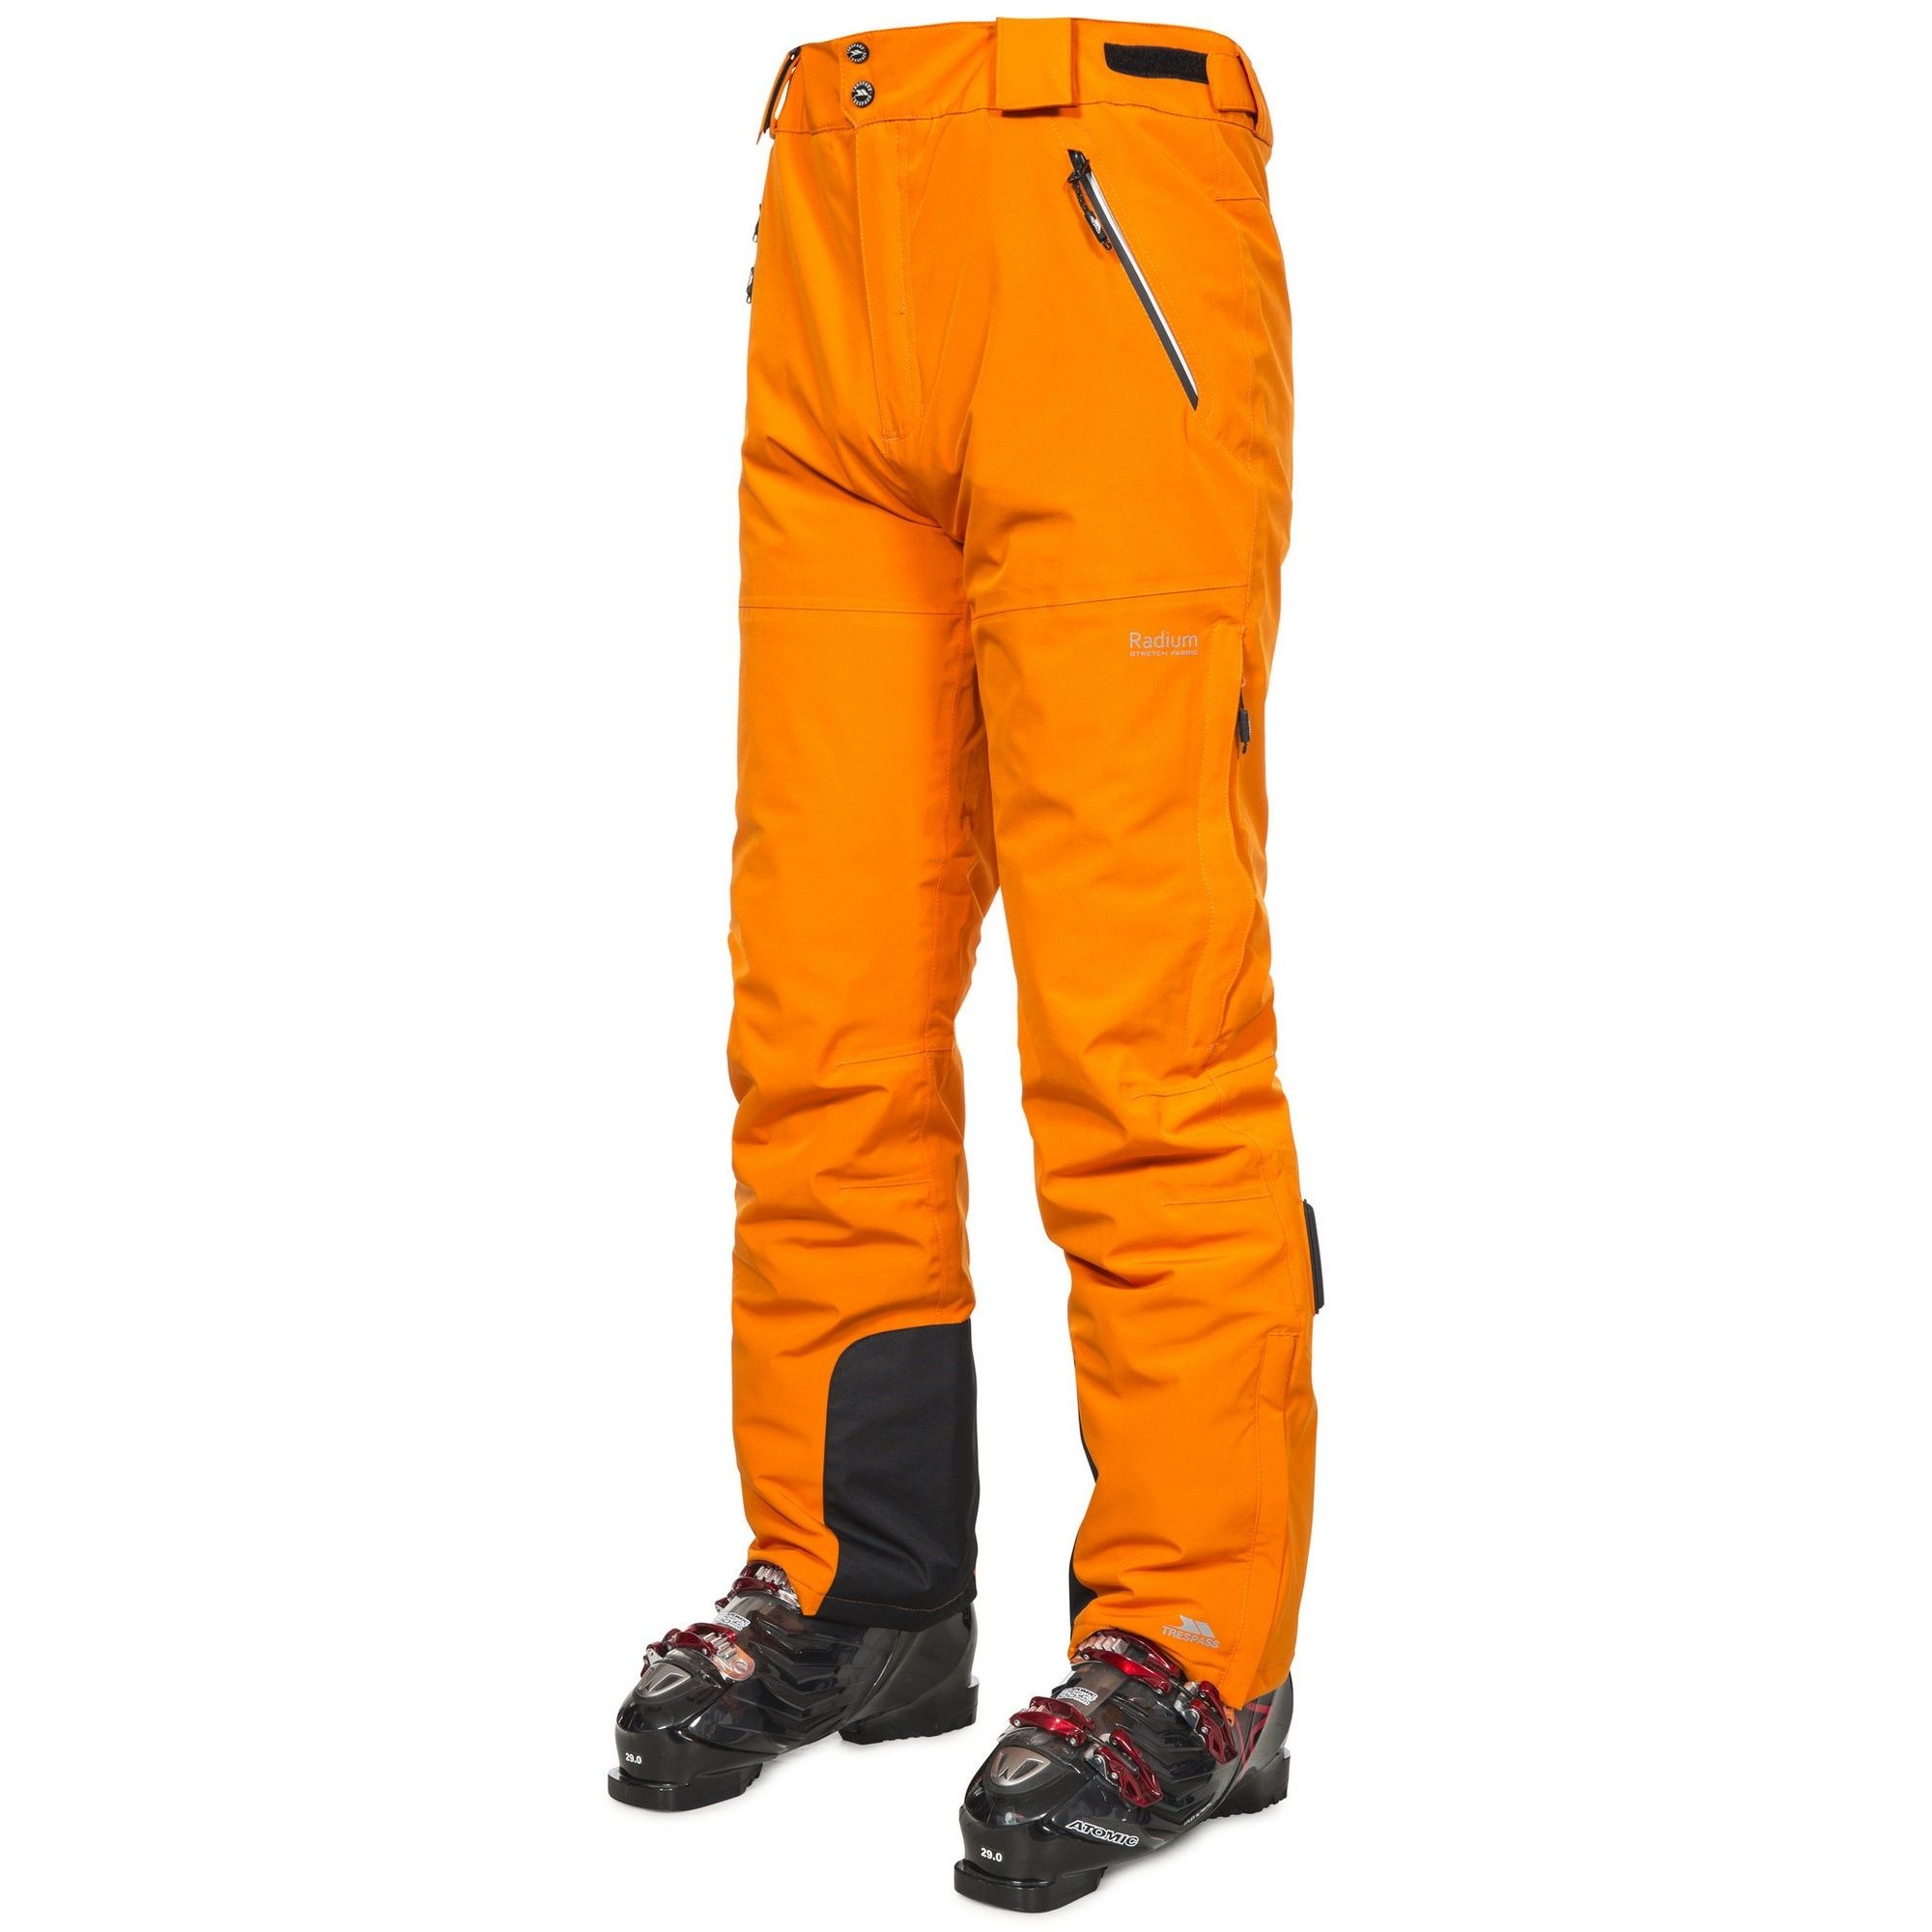 Lightly padded. Microfleece at seat and knees. 3 water repellent zip pockets. Detachable braces. Side leg ventilation zips. Side leg ankle zip with facing. Ankle gaiters. Articulated knees. Slim fit. Waterproof 10000mm, breathable 70000mvp, windproof, taped seams, Recco. Shell: 92% Polyester/8% Elastane, Lining: 100% Polyester, Filling: 100% Polyester. Trespass Mens Waist Sizing (approx): S - 32in/81cm, M - 34in/86cm, L - 36in/91.5cm, XL - 38in/96.5cm, XXL - 40in/101.5cm, 3XL - 42in/106.5cm.